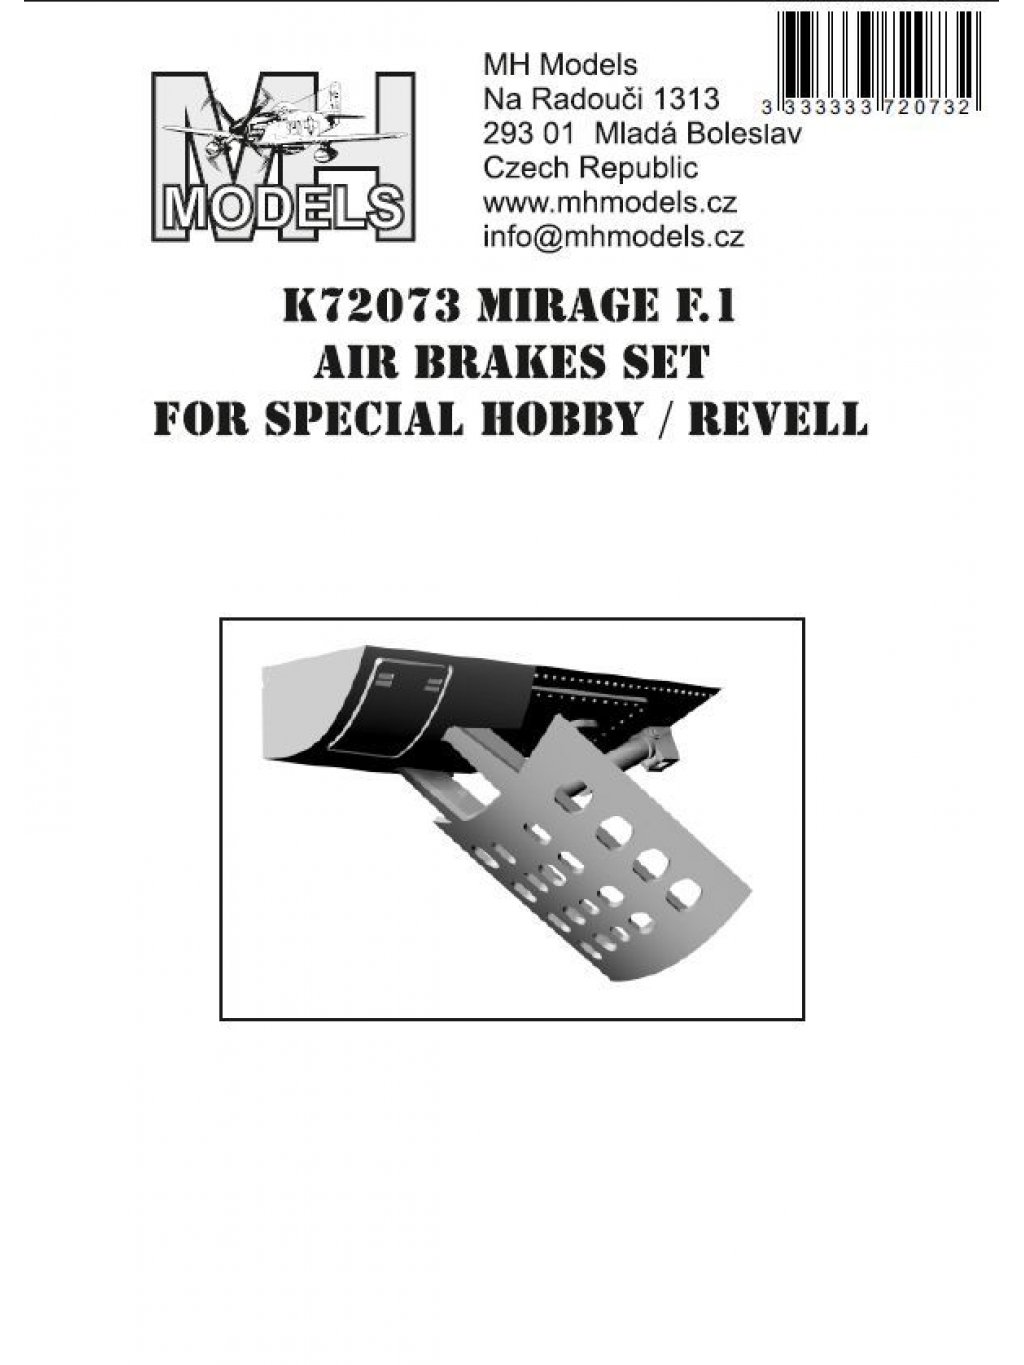 Mirage F.1 Air Brakes set for Special Hobby/Revell